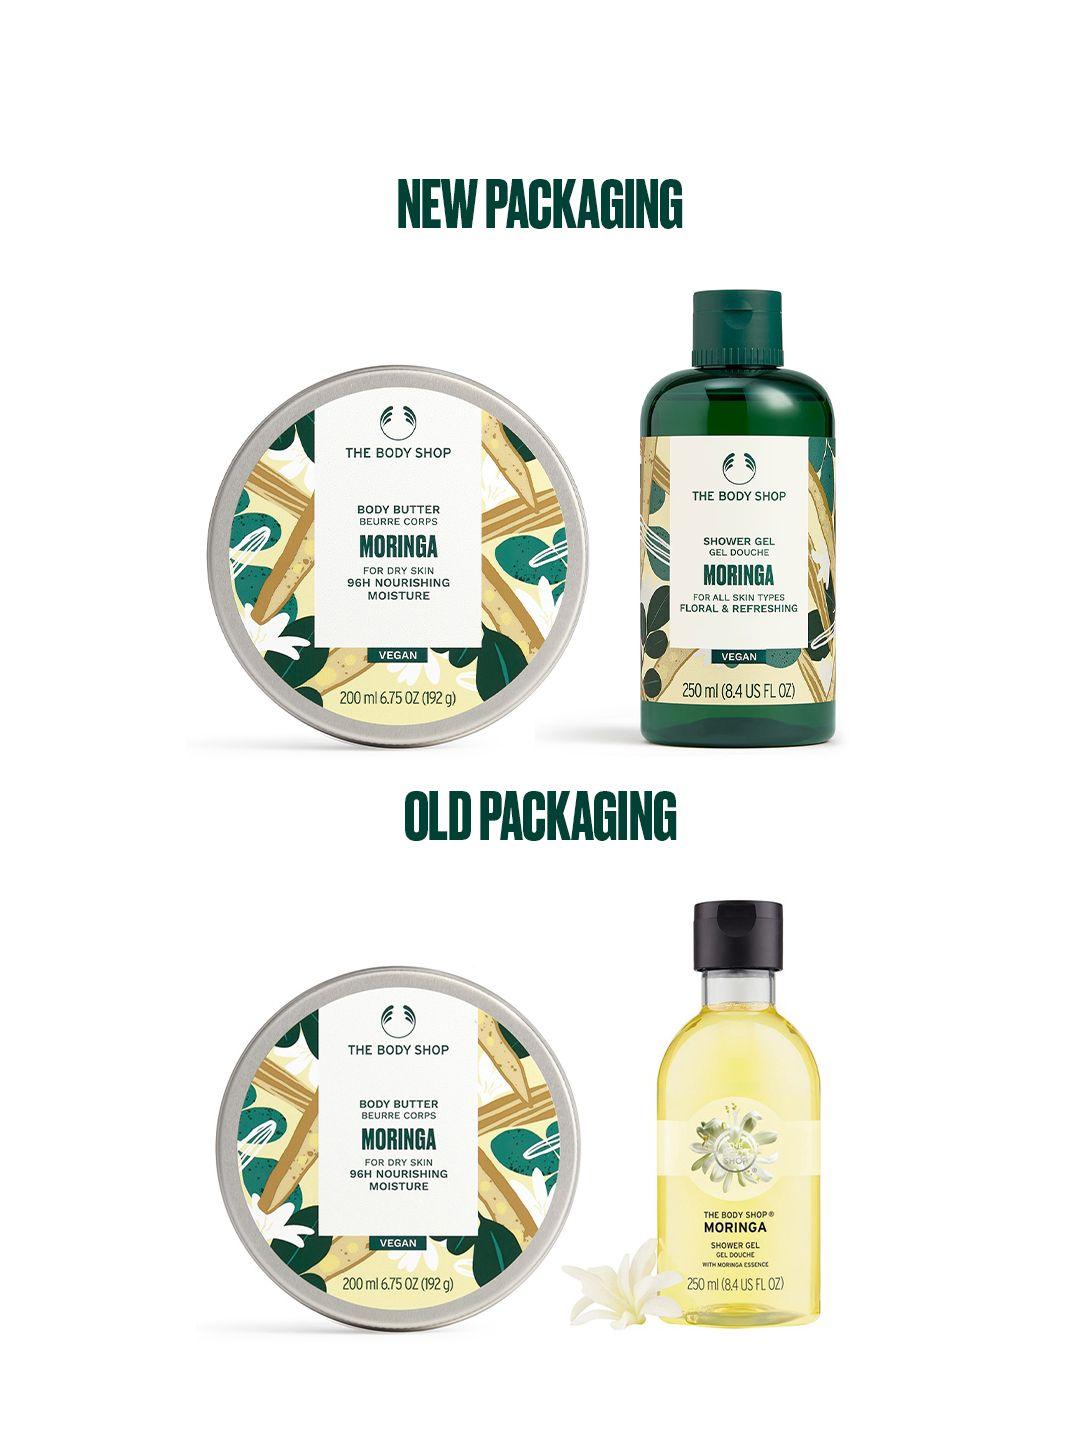 the body shop moringa shower gel with vitamin e - 250 ml & body butter with shea - 200 ml